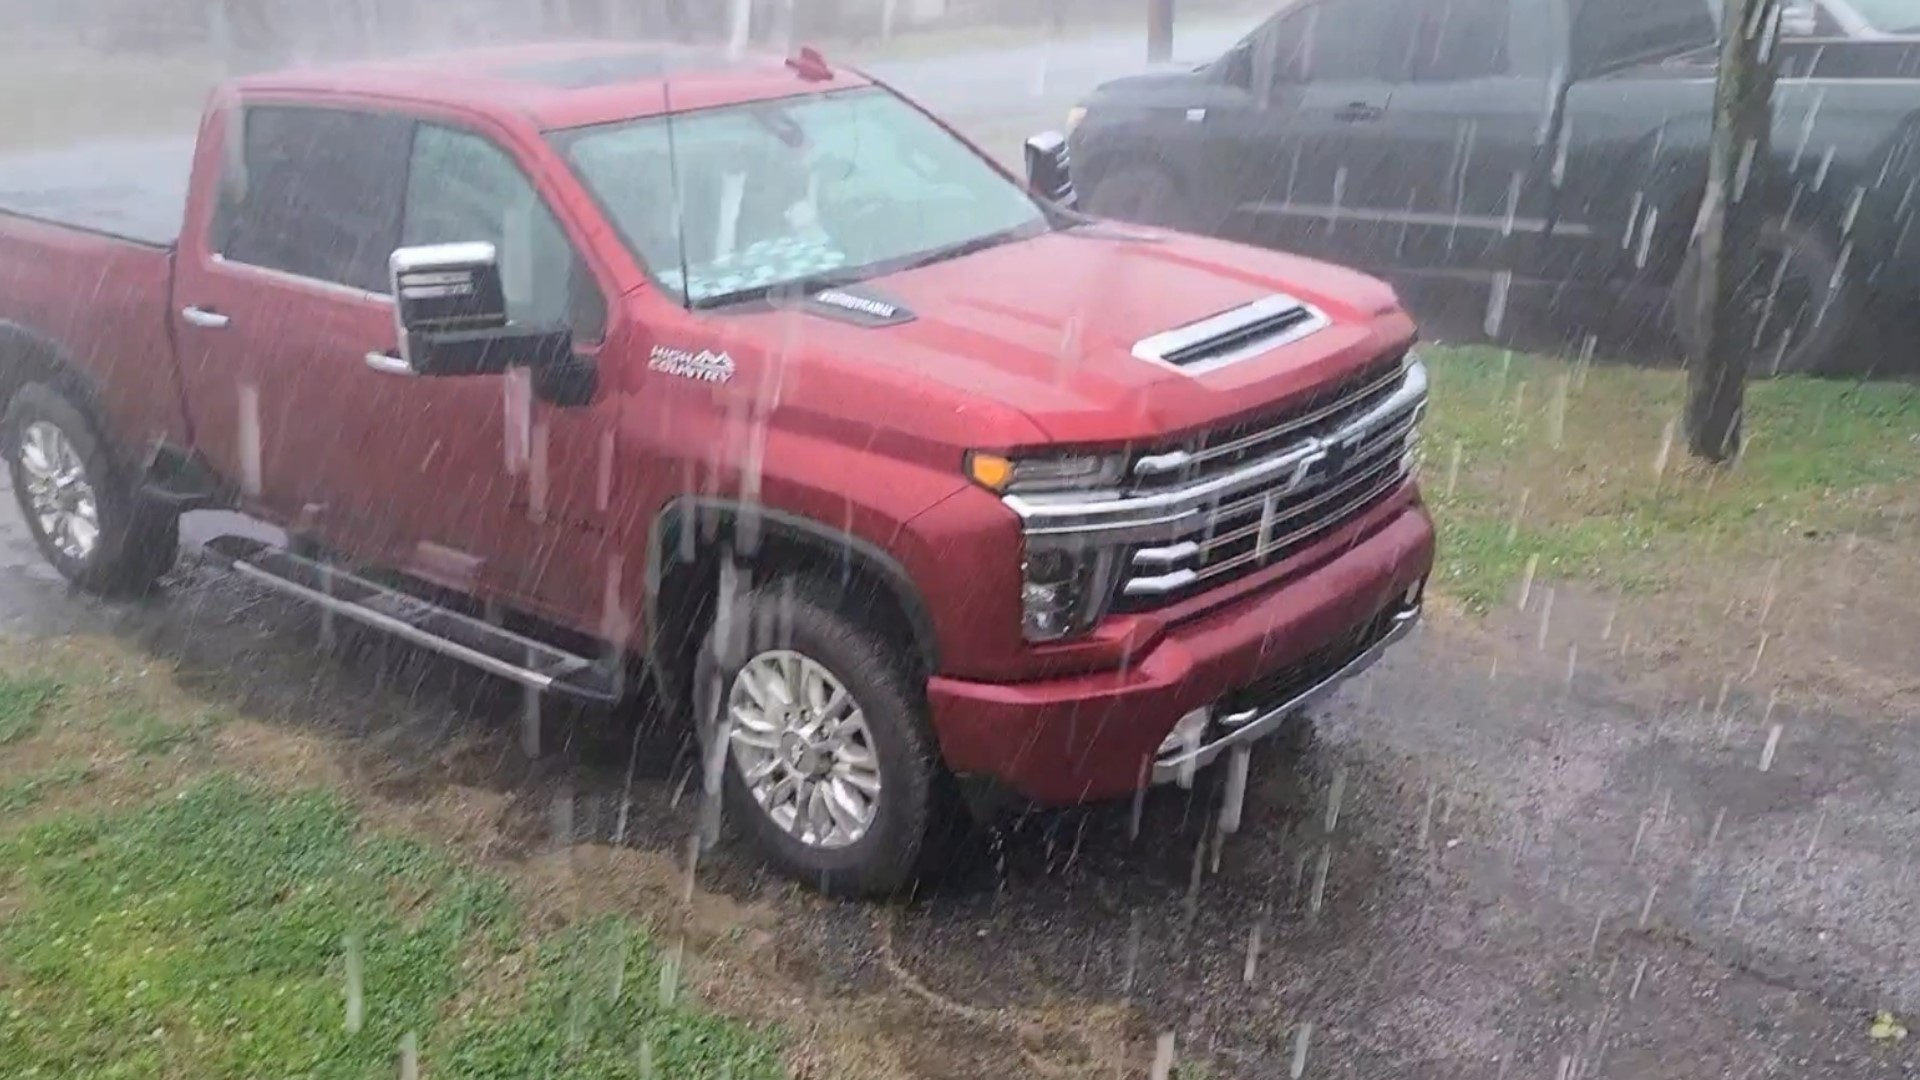 This video was shot Sunday morning in Onalaska as storms moved through.